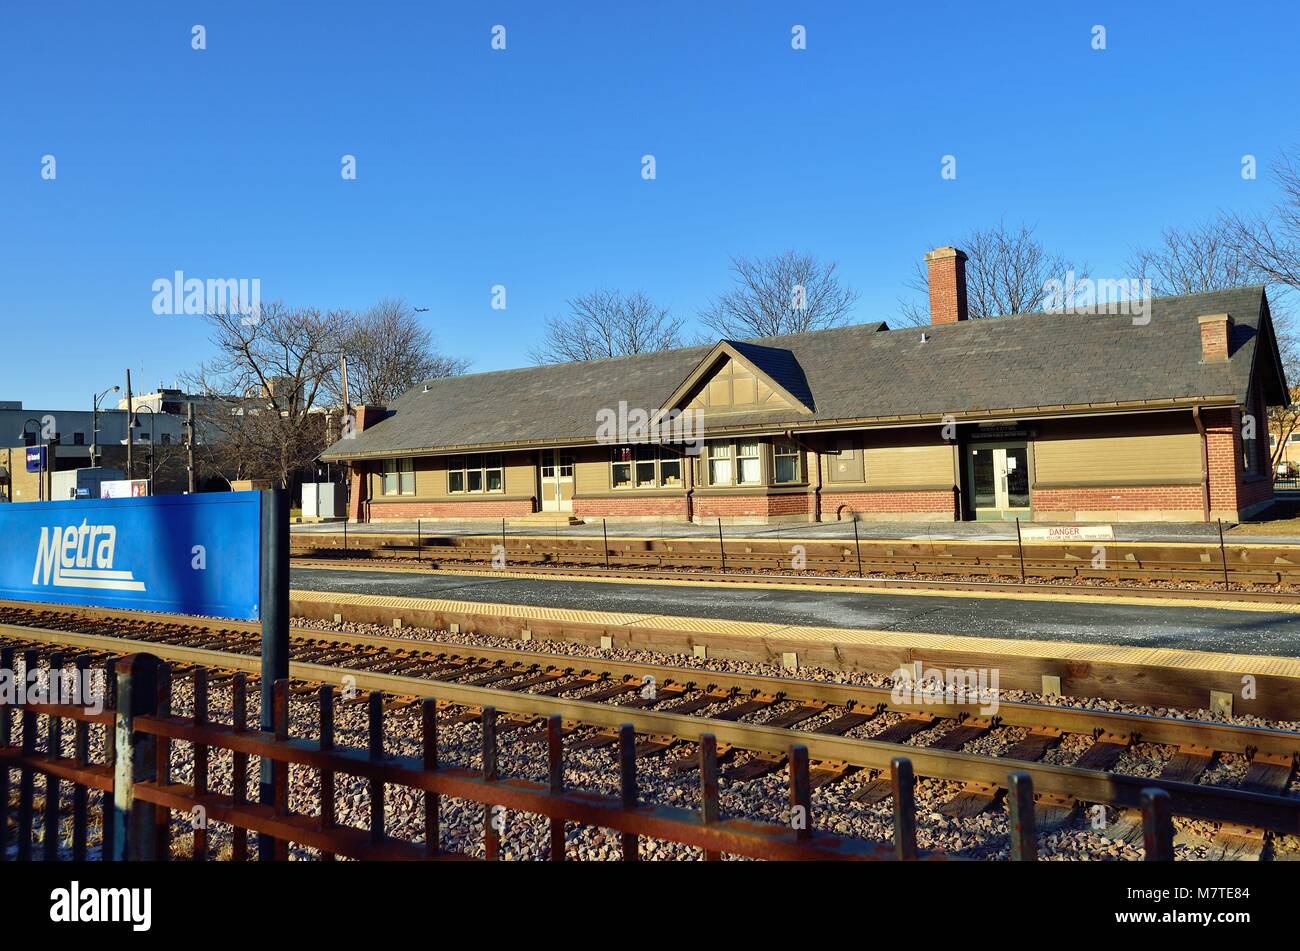 Chicago, Illinois, USA. The Norwood Park Train Station now serving Metra commuters on the northwest side of Chicago. The station was built in 1907. Stock Photo